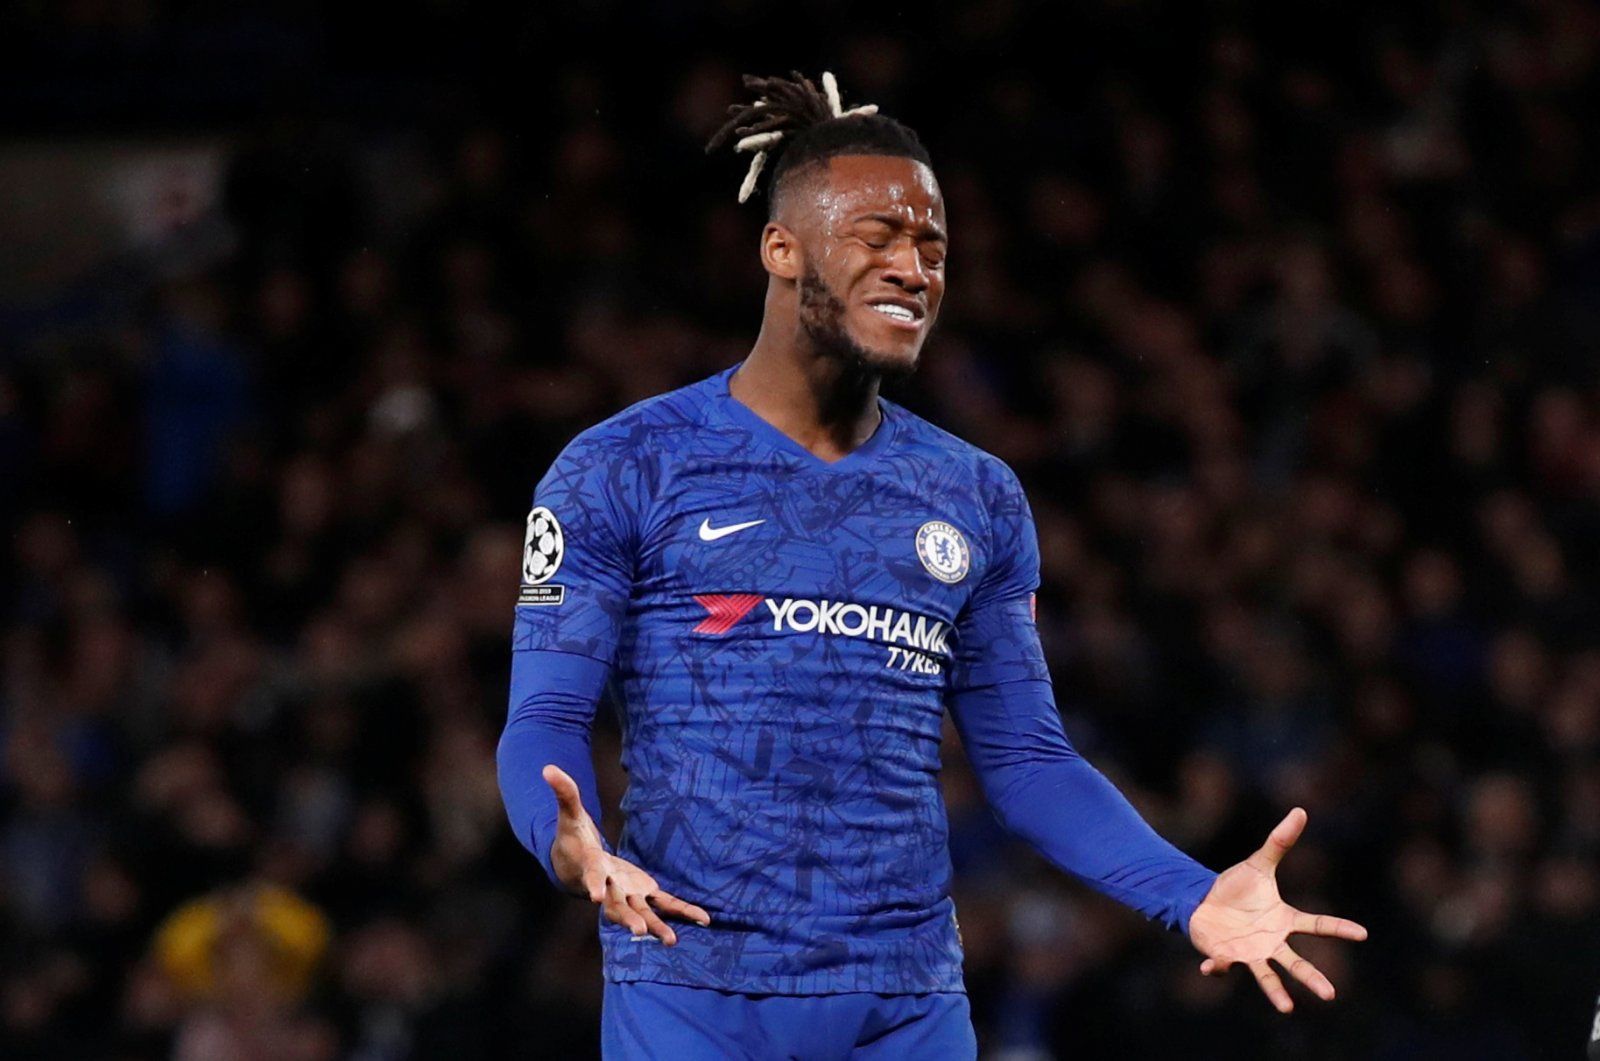 Everton: Michy Batshuayi tipped to provide ‘different option’ -Everton News